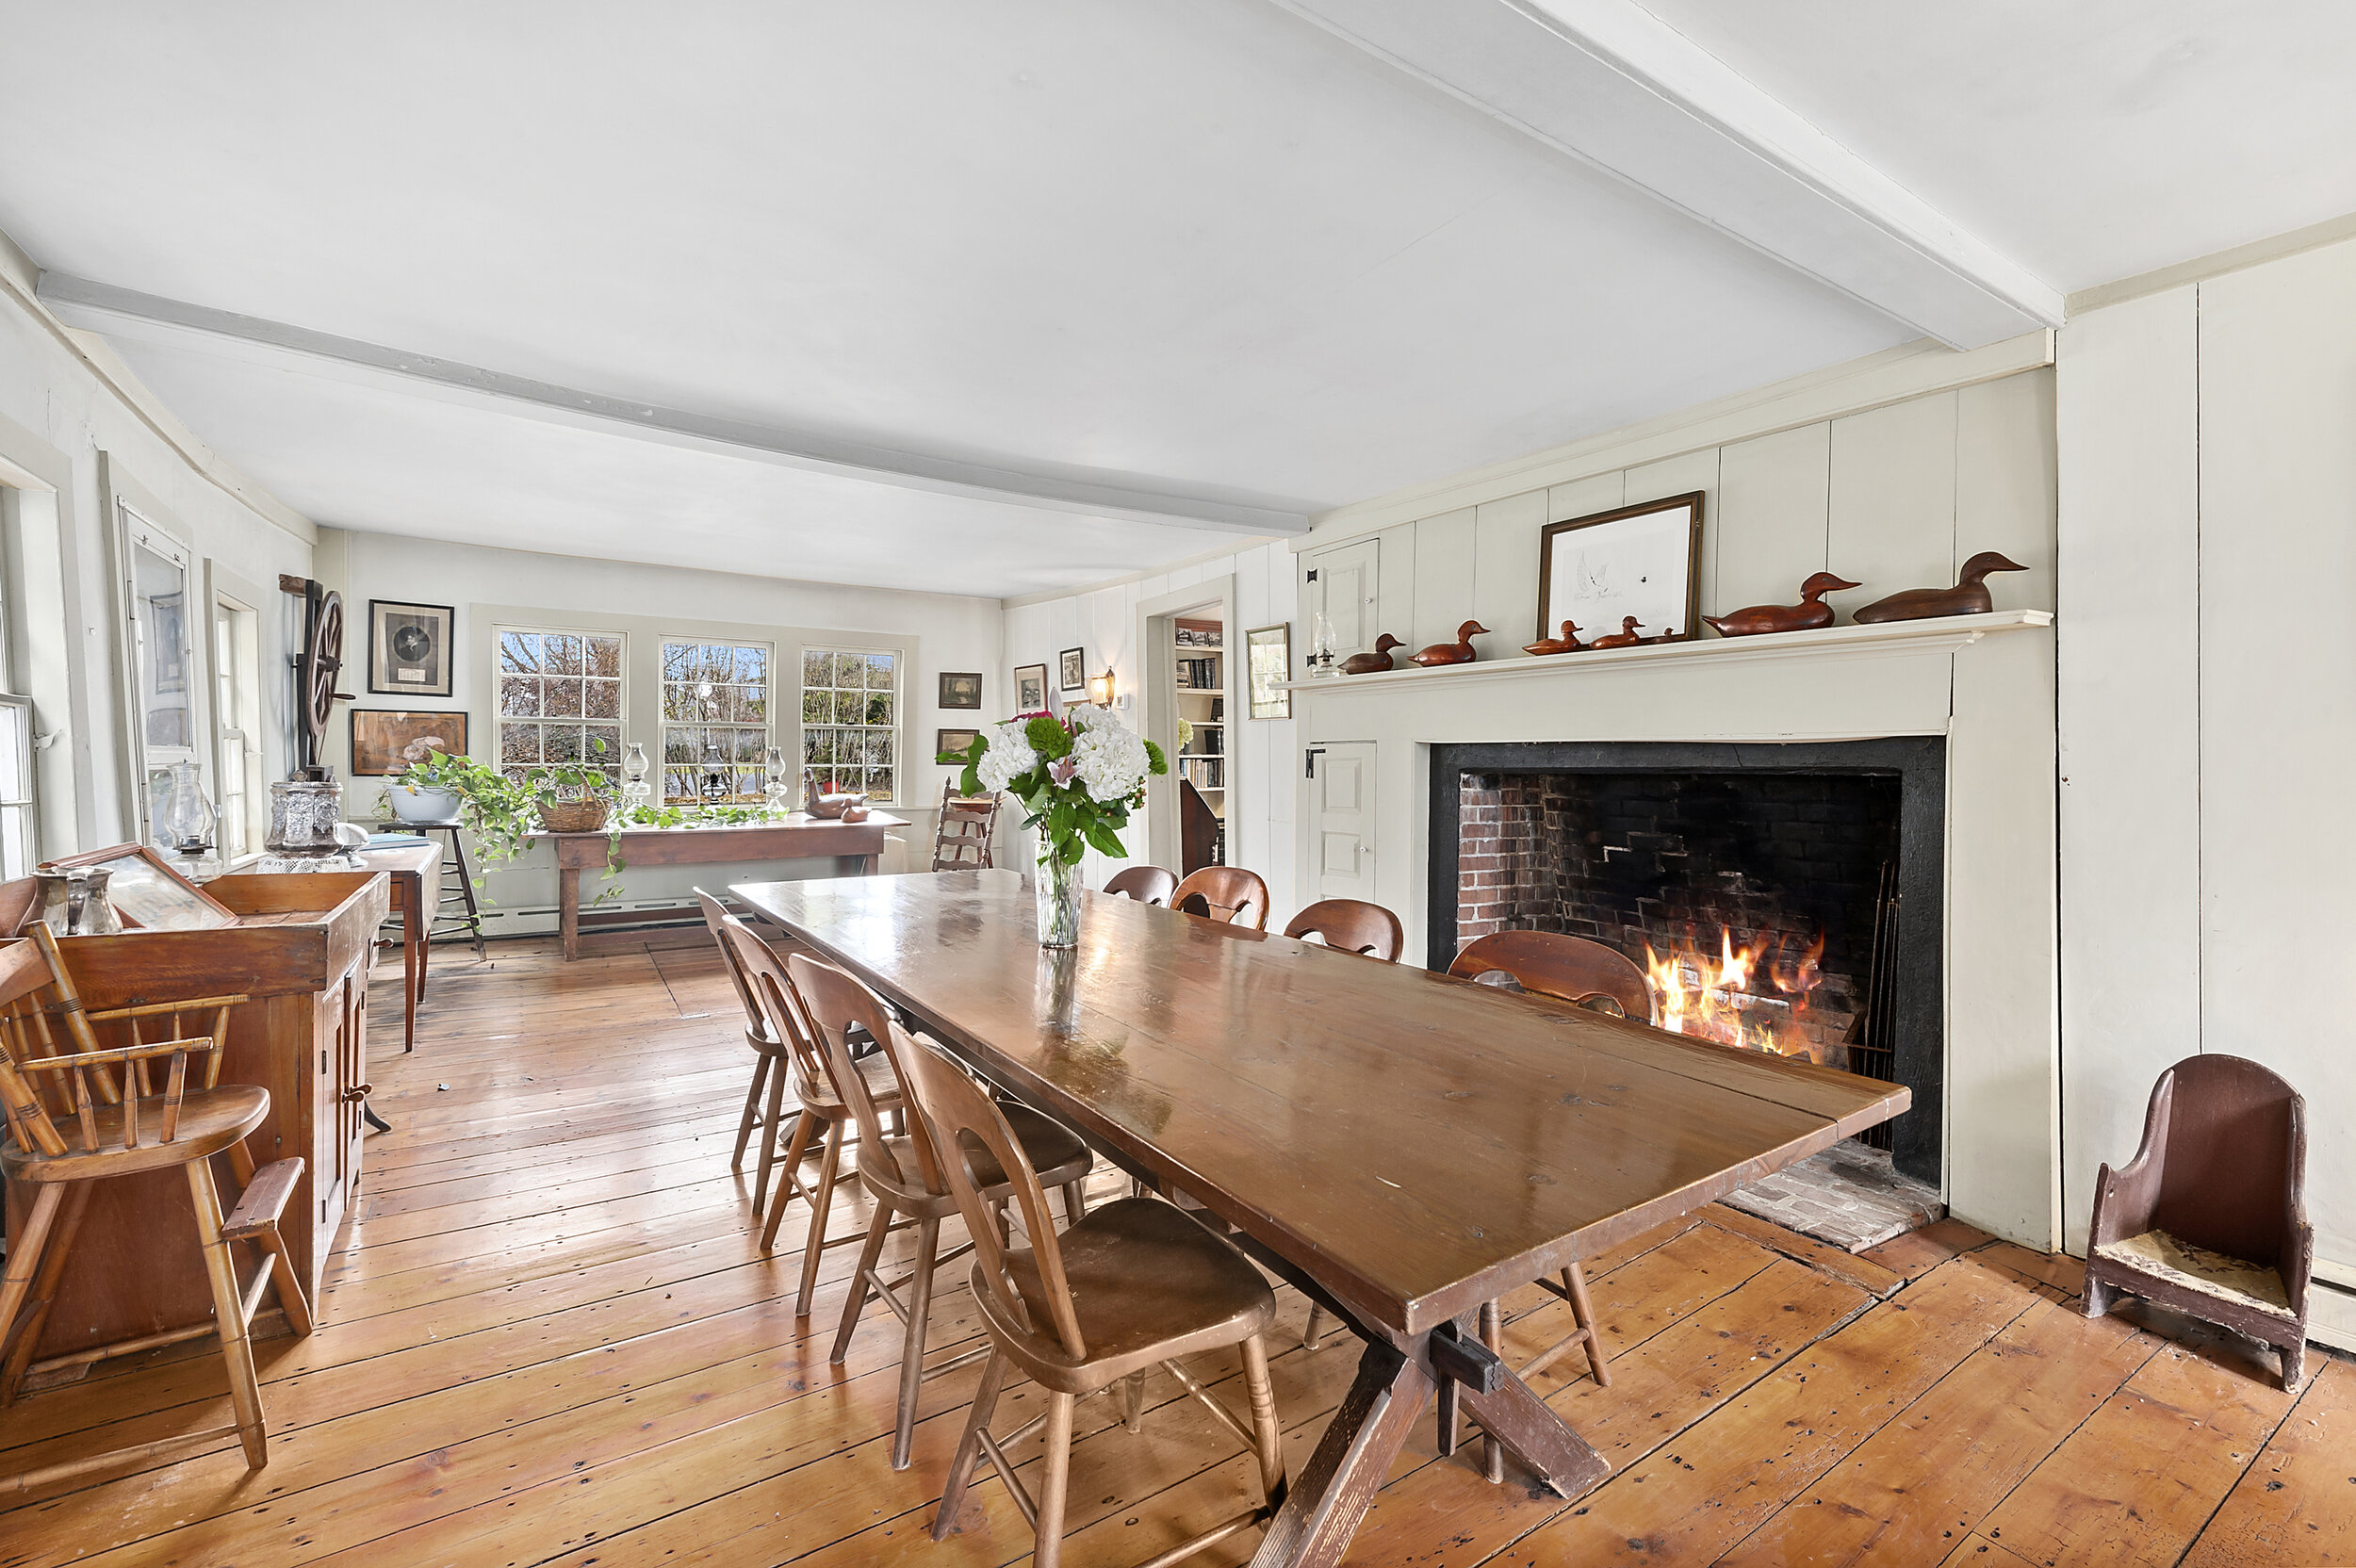  Once home to the Riding Club of East Hampton, where young Jacqueline Bouvier learned to ride, the .9-acre former “Abraham Baker House” property abuts the village’s Estate Section and carries the special distinction of being both in the Village and t